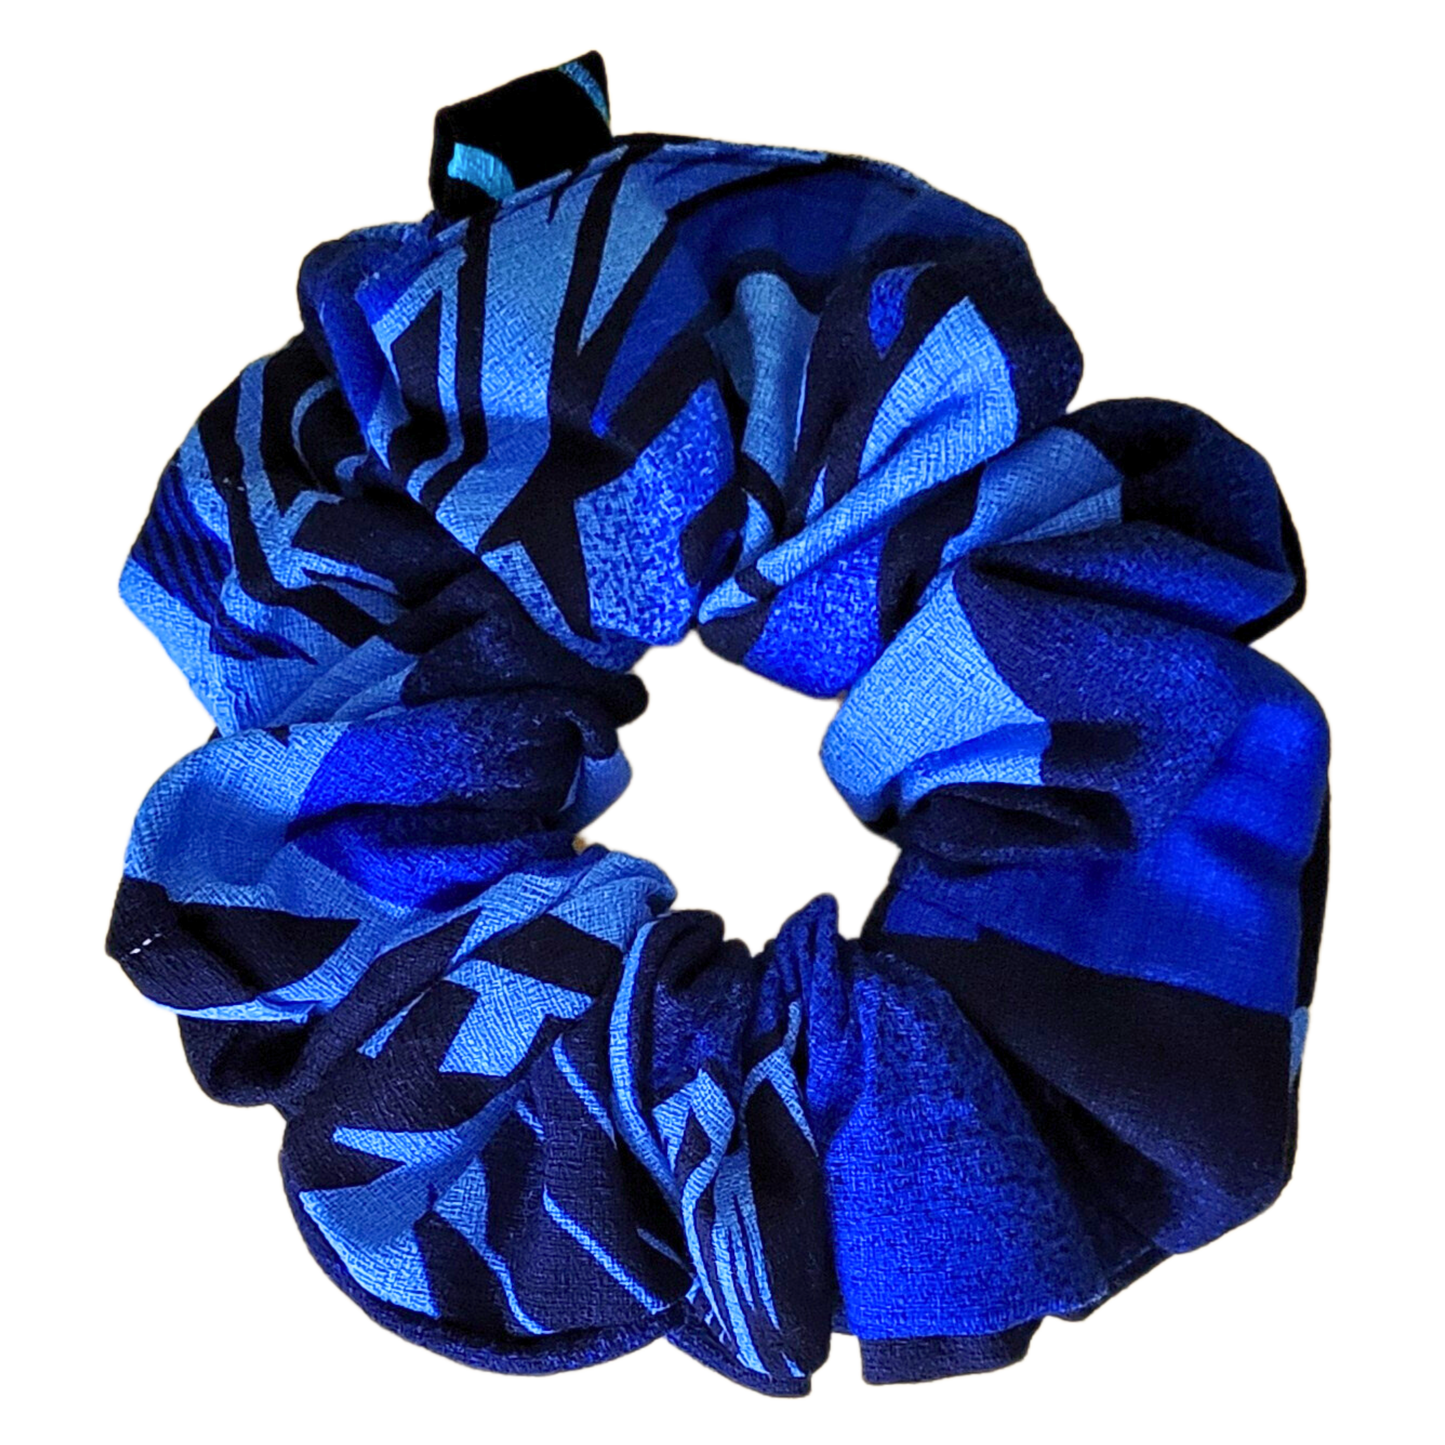 Pasifika hair scrunchies. made from cotton. pacific island pattered fabric. sizes available small, medium, large and extra large. this style is blue